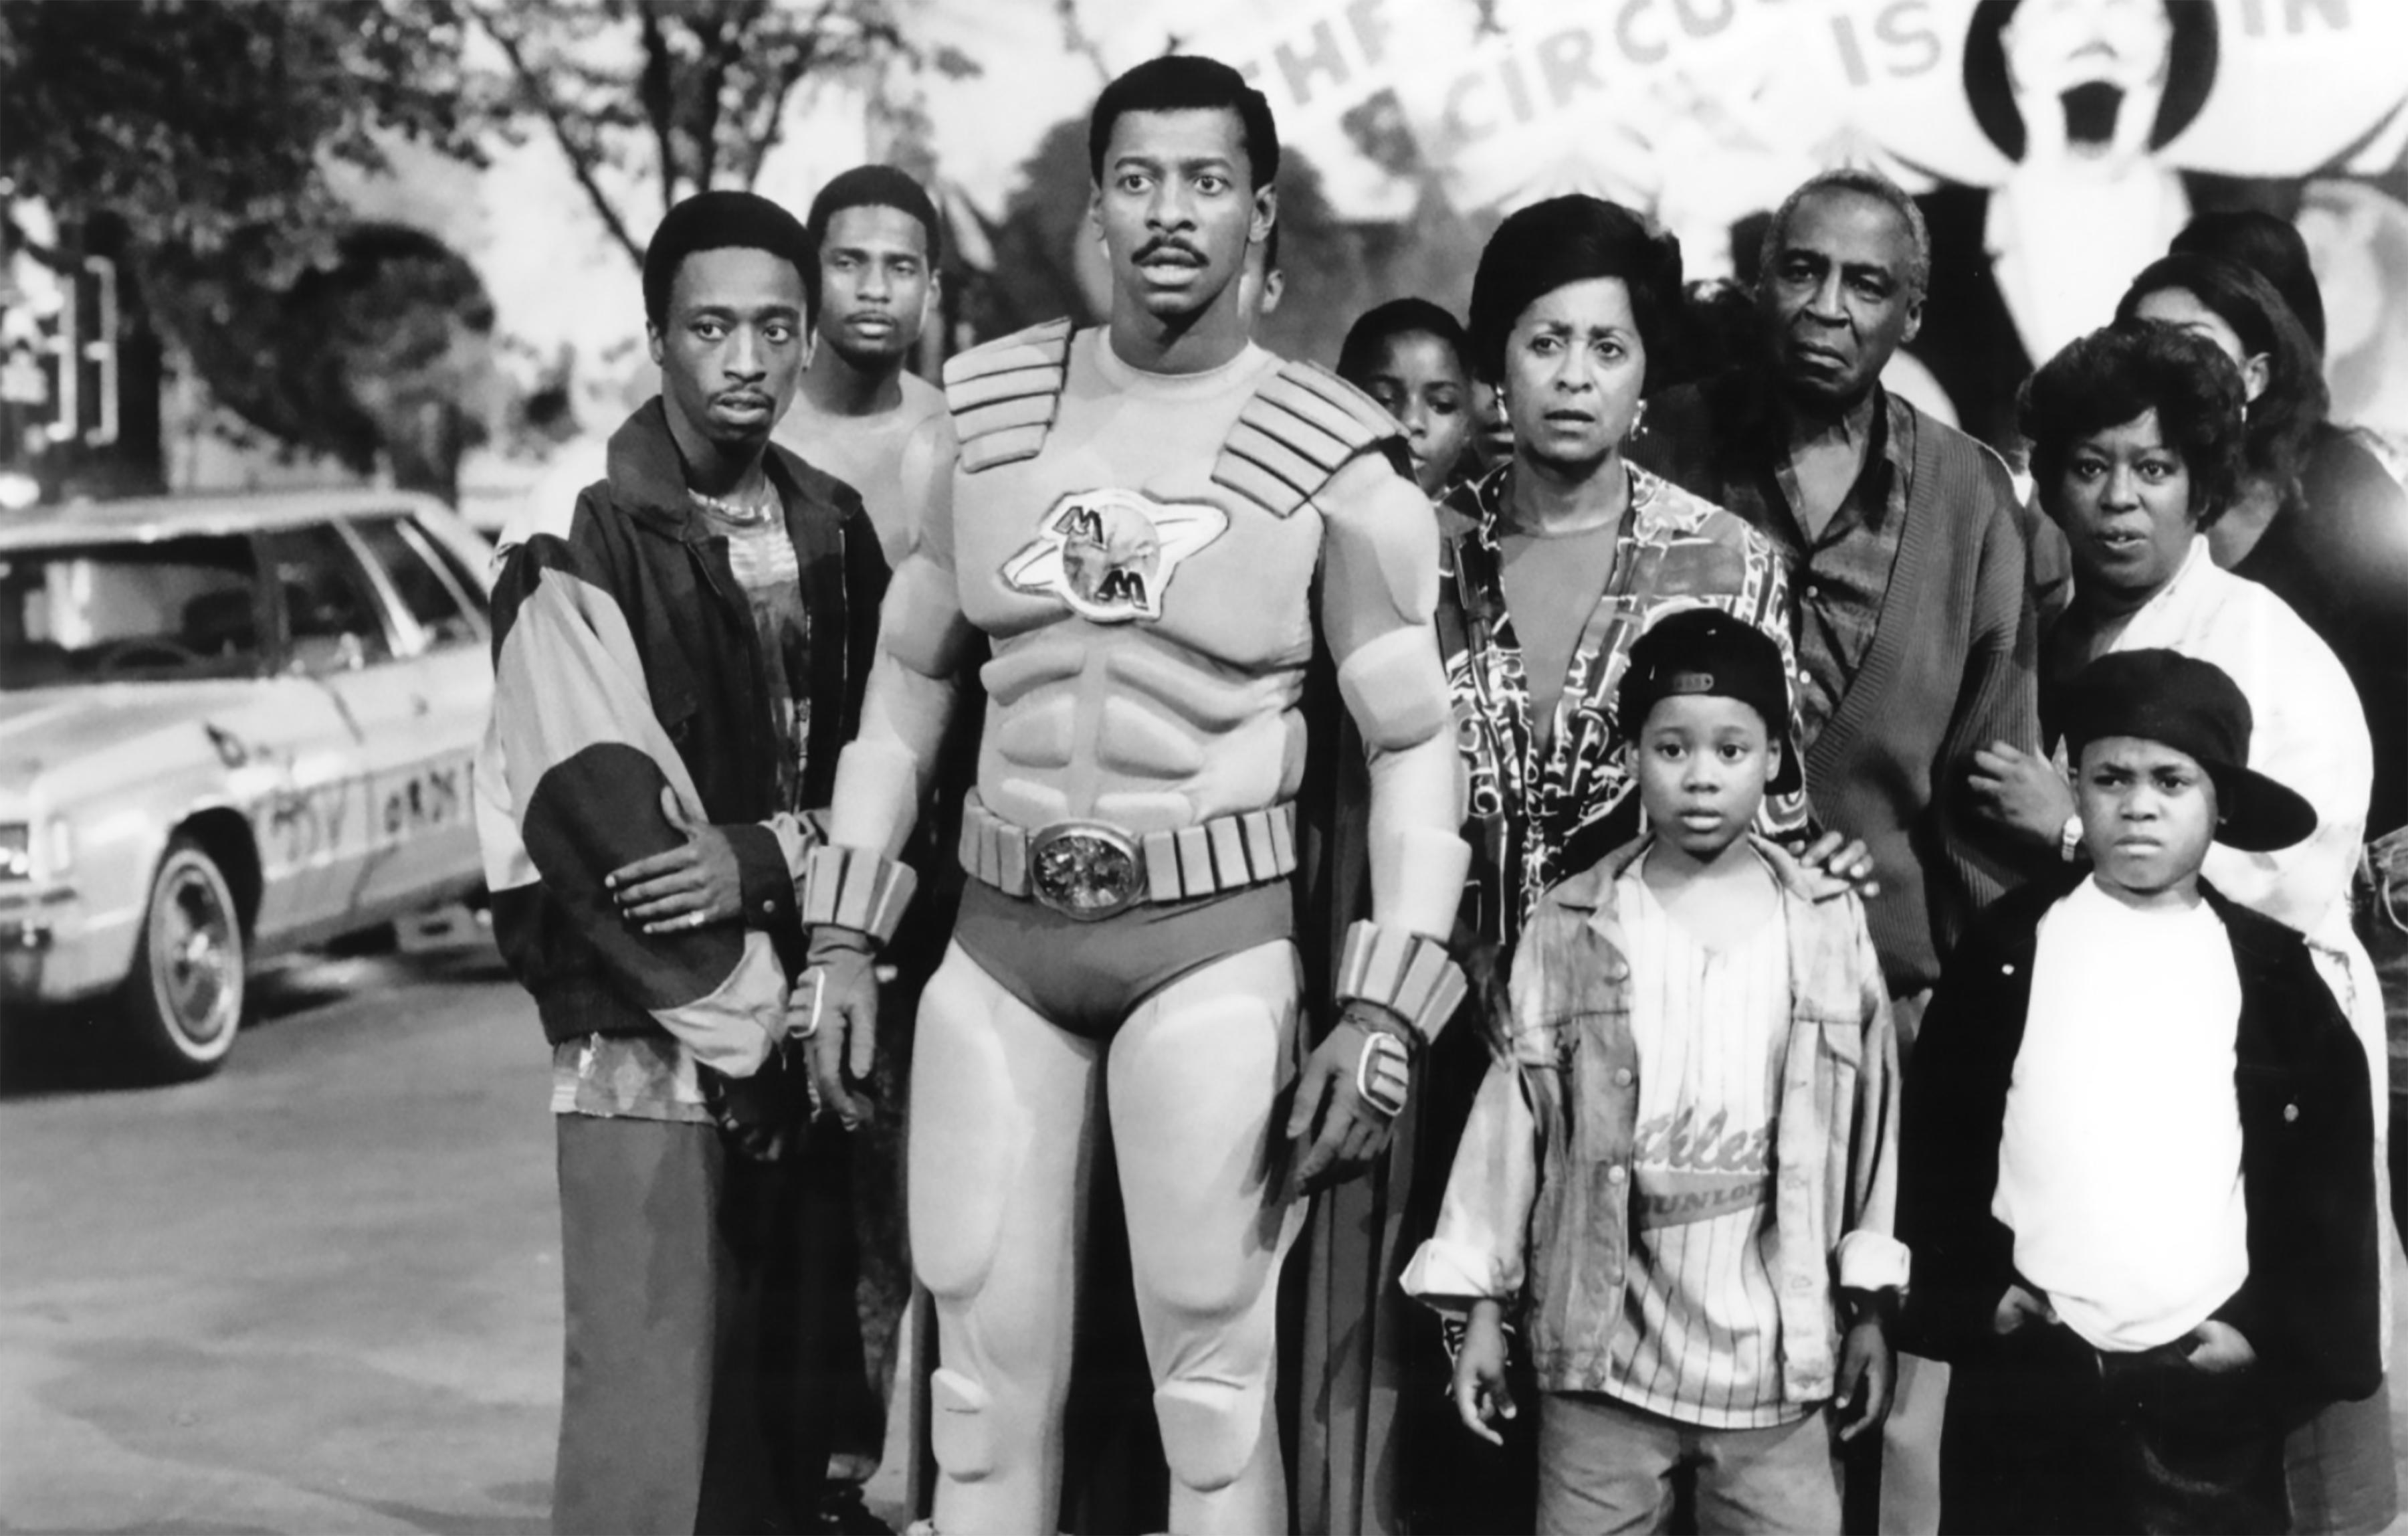 Townsend as Meteor man with a neighborhood of people behind him